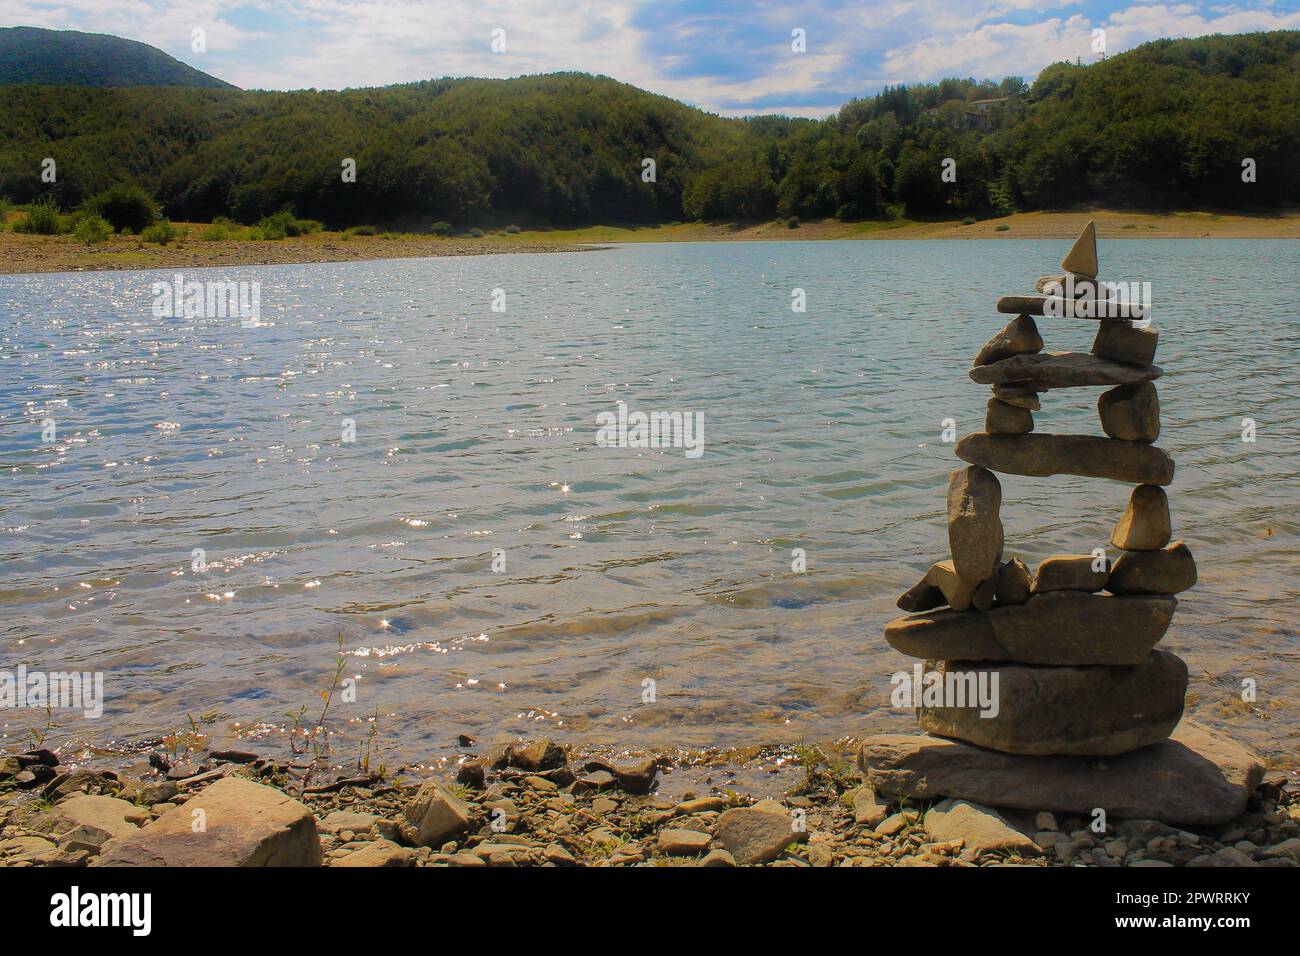 Pyramid of the stones on the beach against mountains and lake. Concept of spirituality, relax, zen. Stock Photo